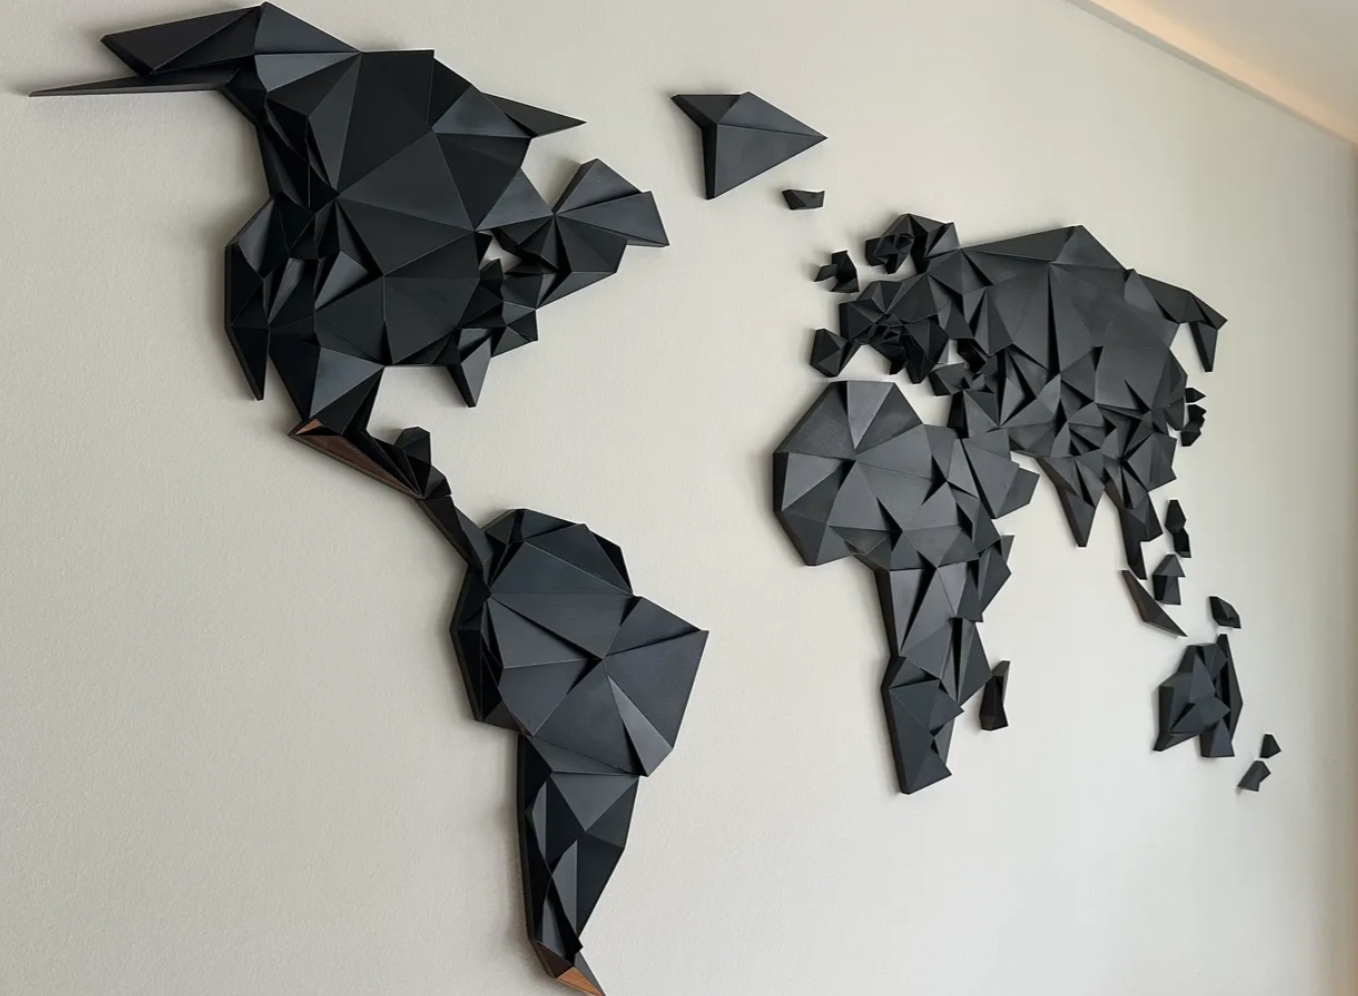 3D-printed Low Poly World Map